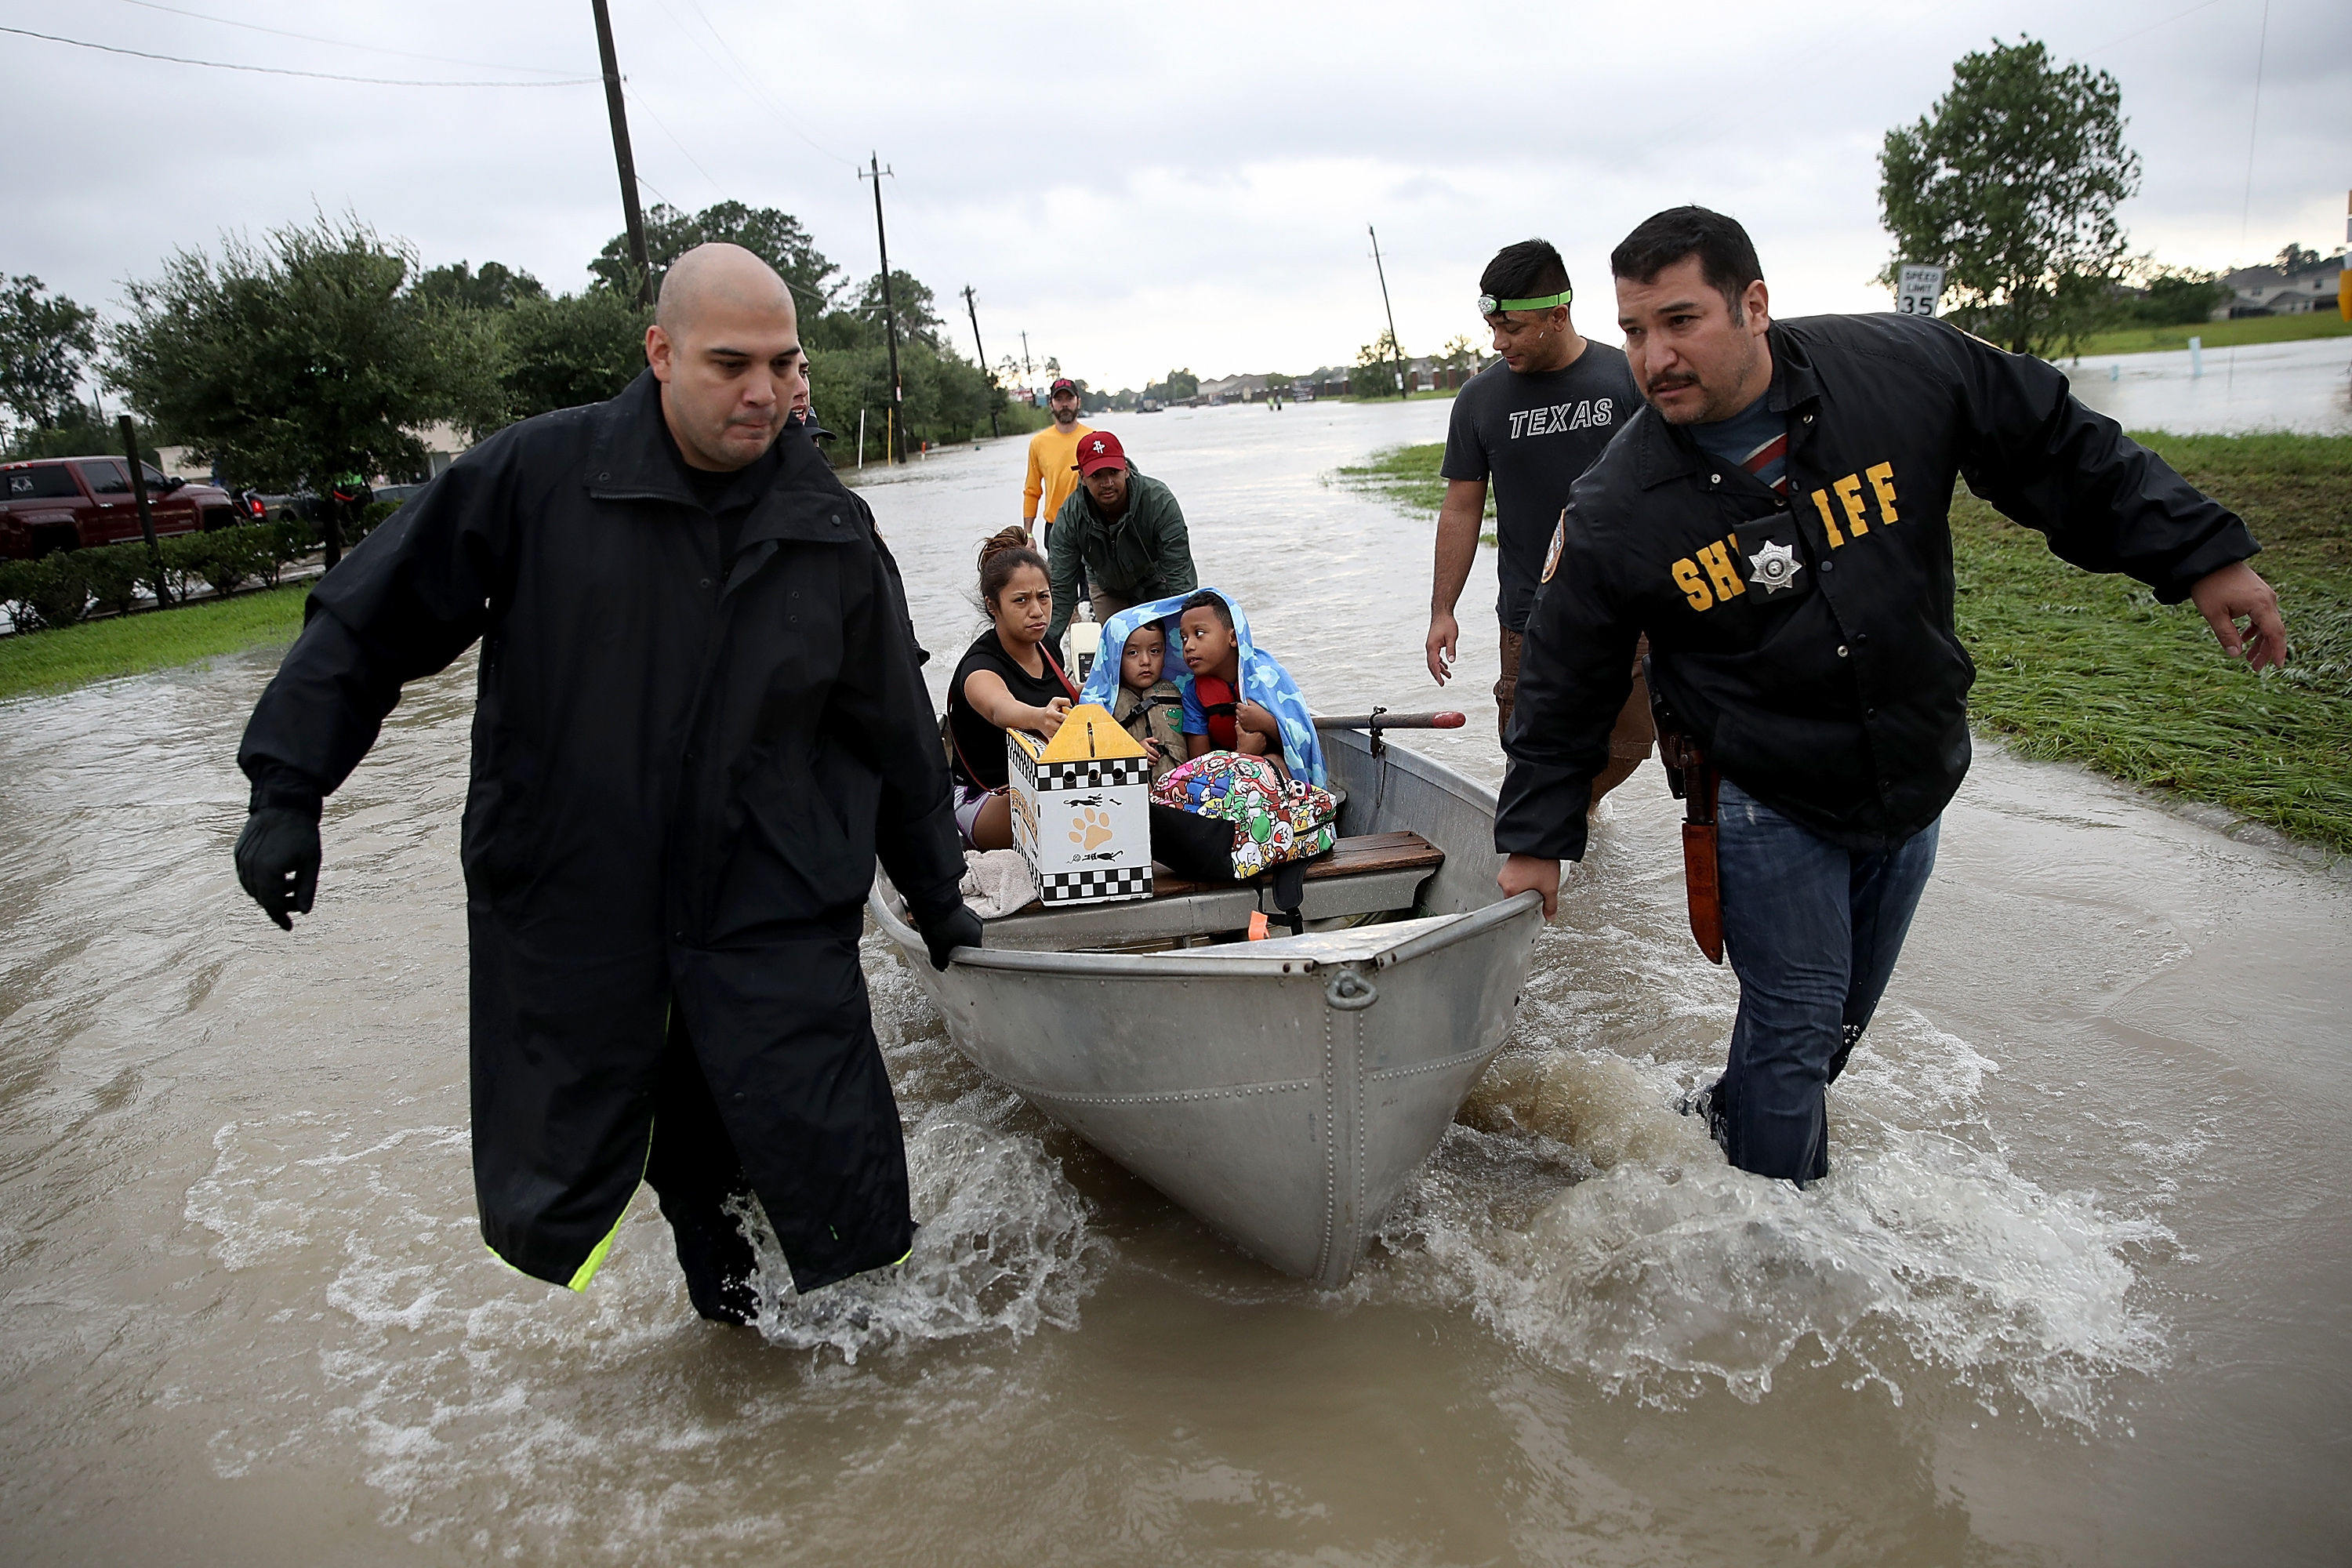 The Tellez family is evacuated from their home after severe flooding following Hurricane Harvey in north Houston August 29, 2017 in Houston, Texas. (Win McNamee—Getty Images)